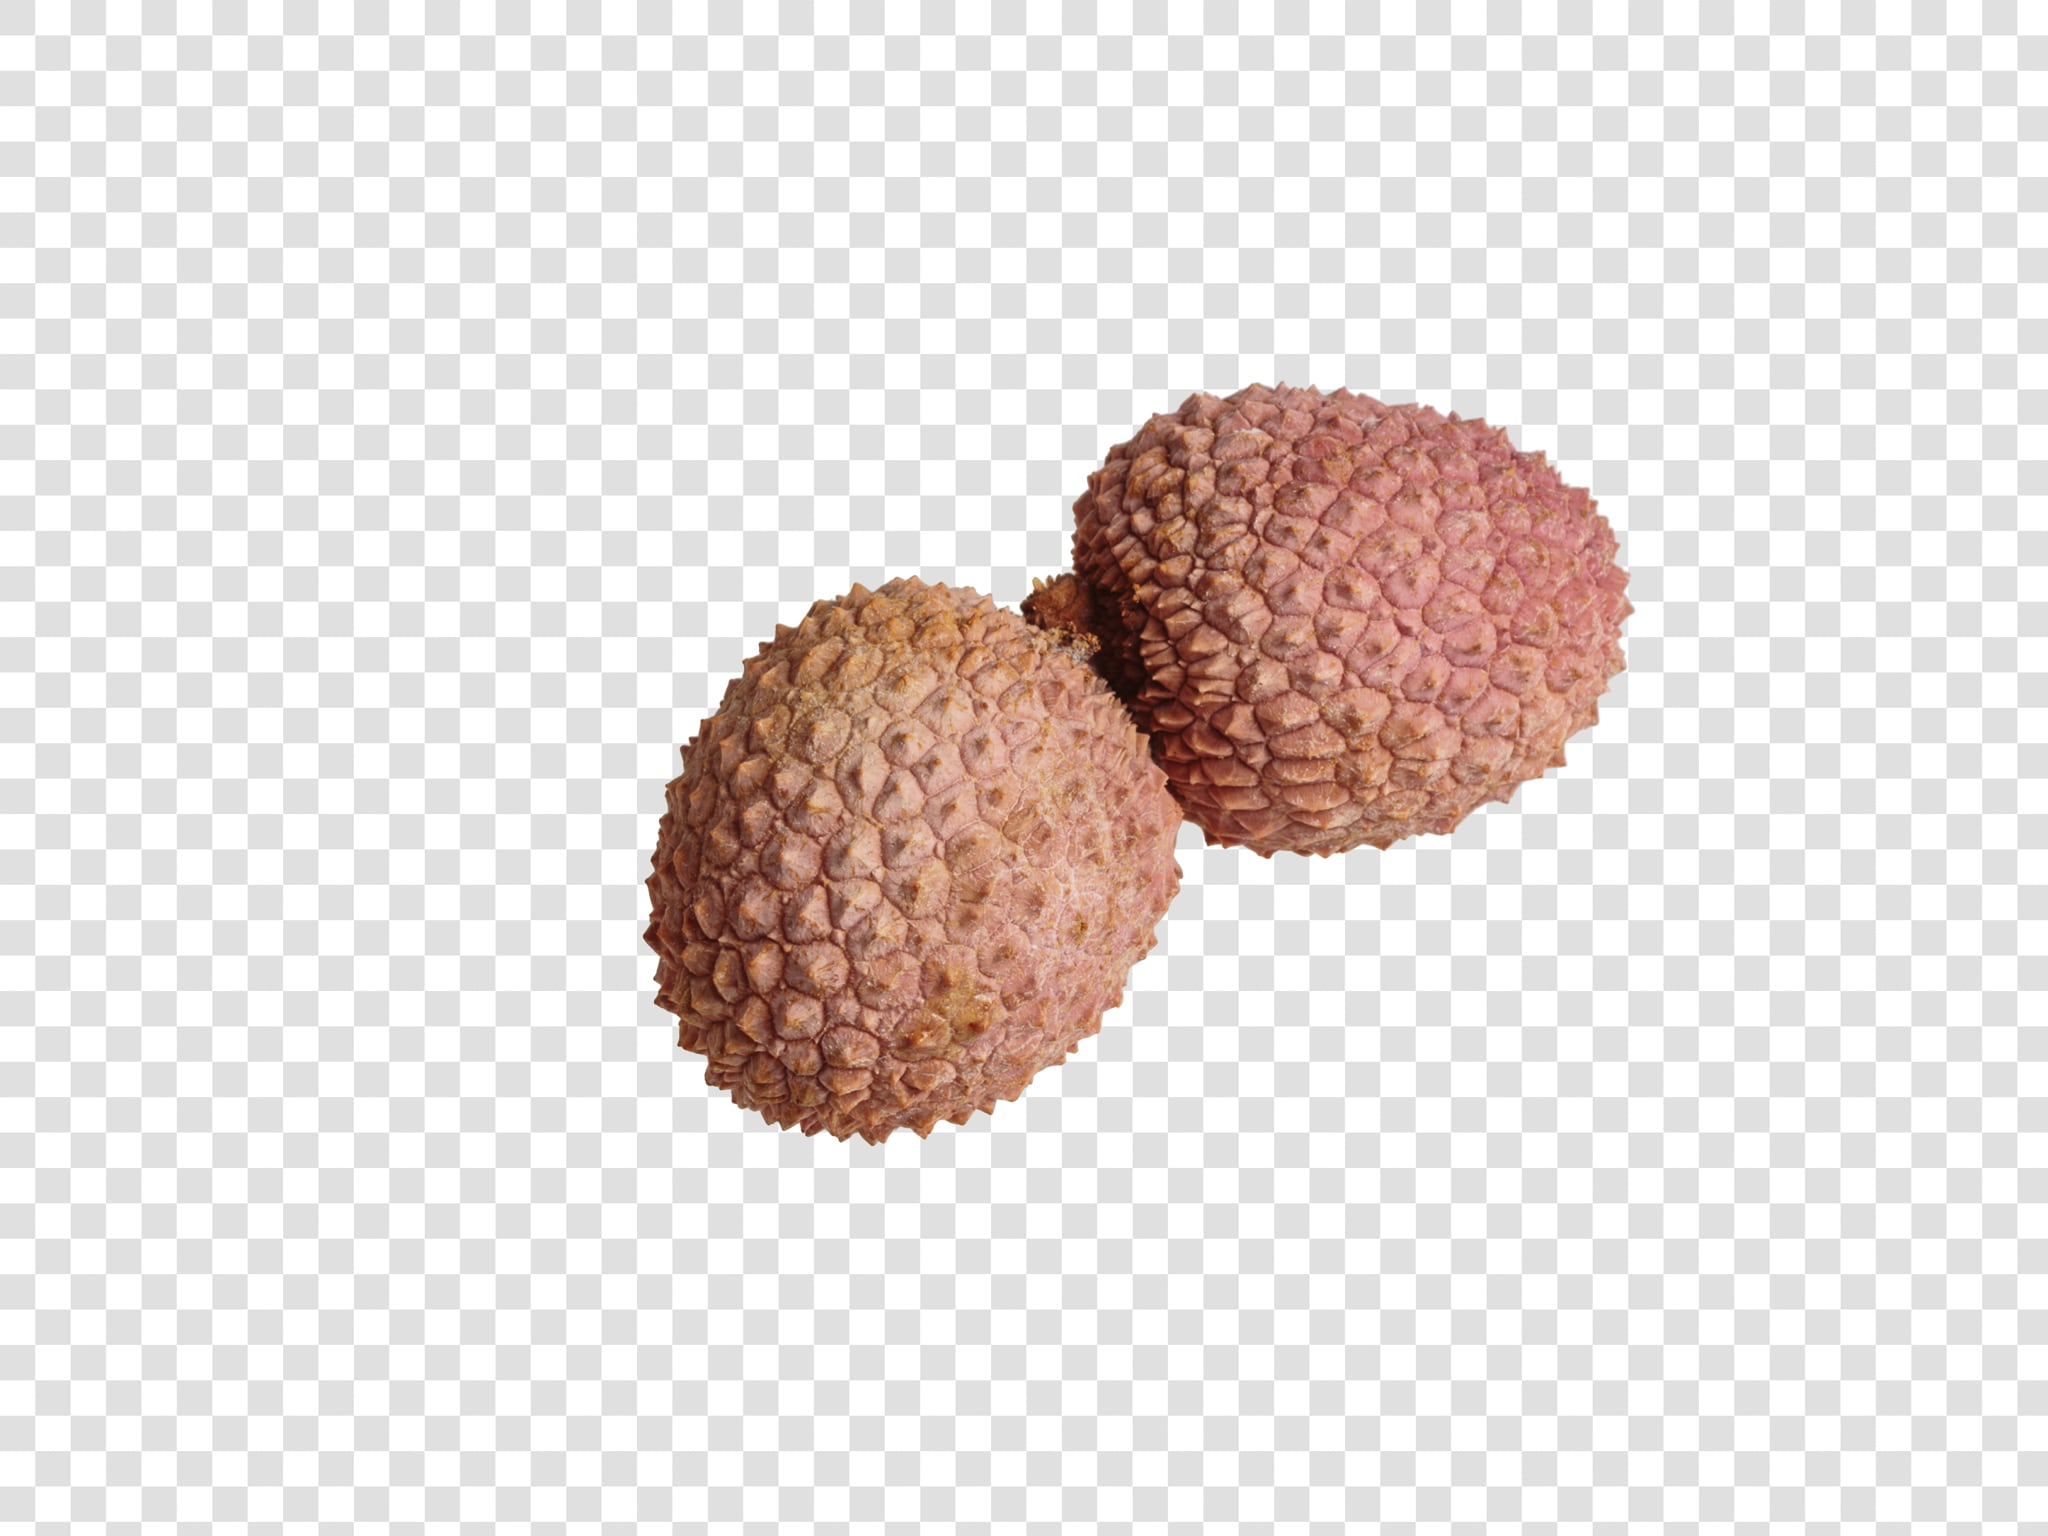 Lychee PSD isolated image